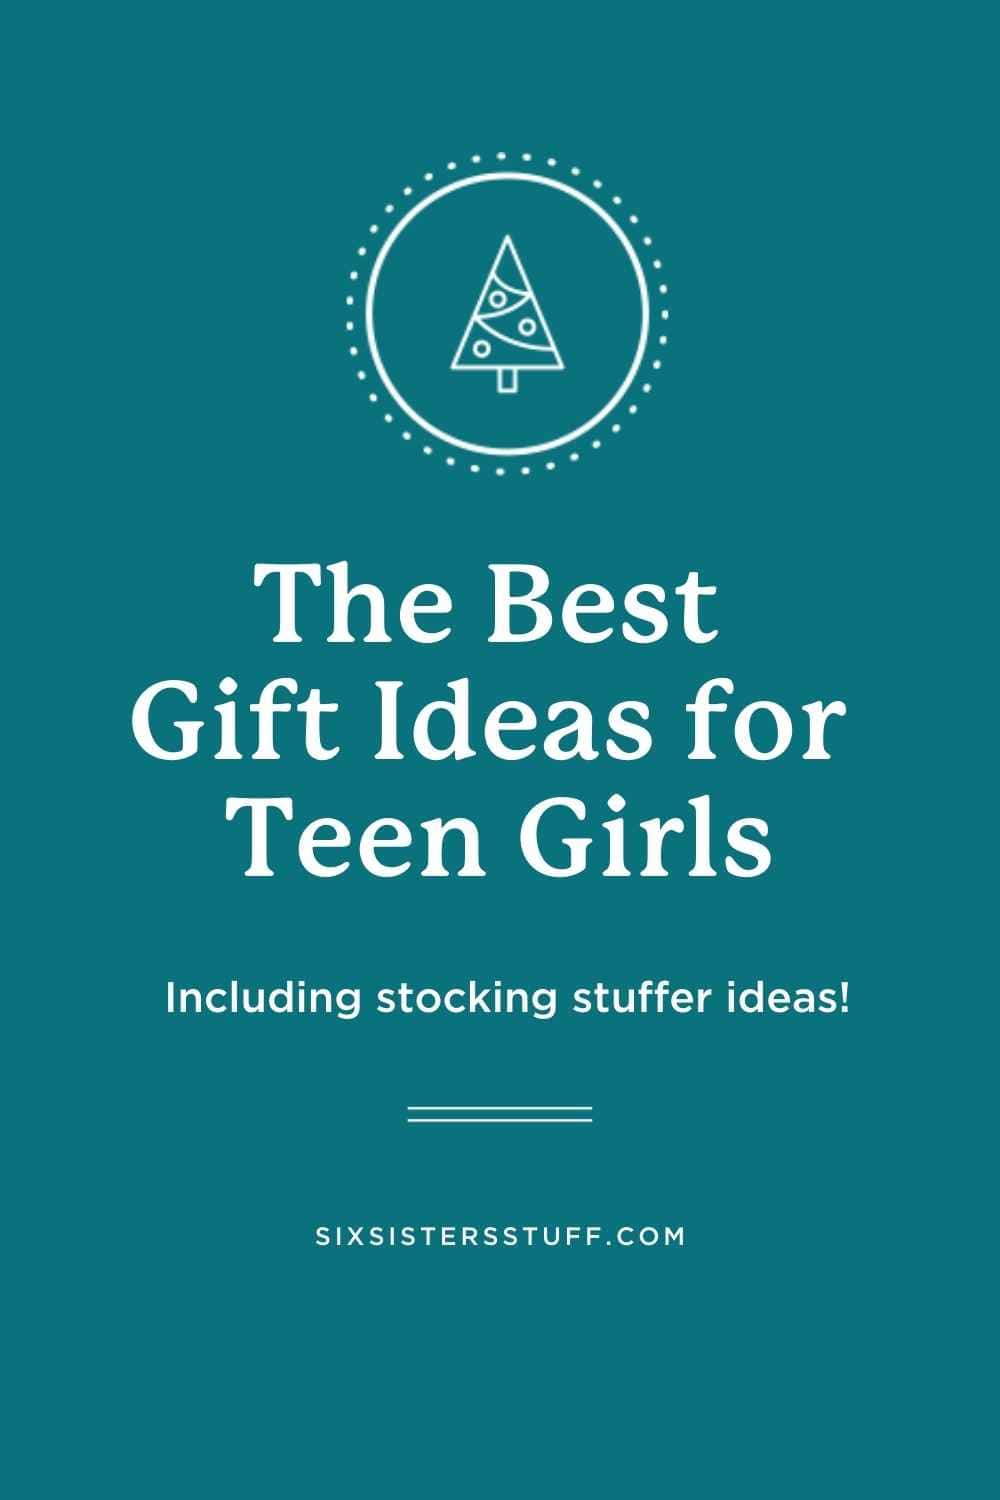 The BEST Gifts for Teen Girls (plus stocking stuffer ideas!)